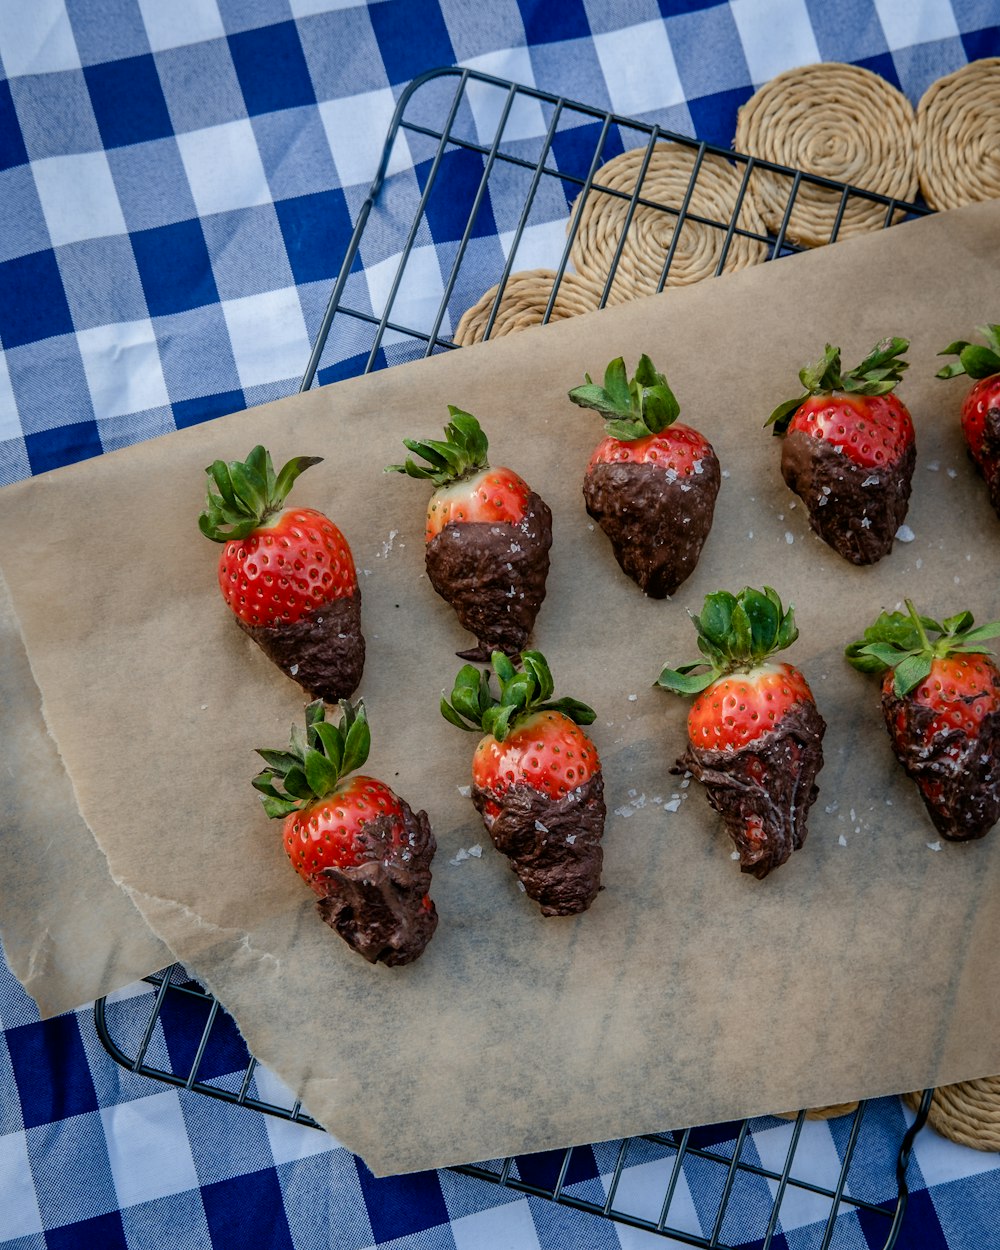 chocolate covered strawberries are arranged on a paper towel